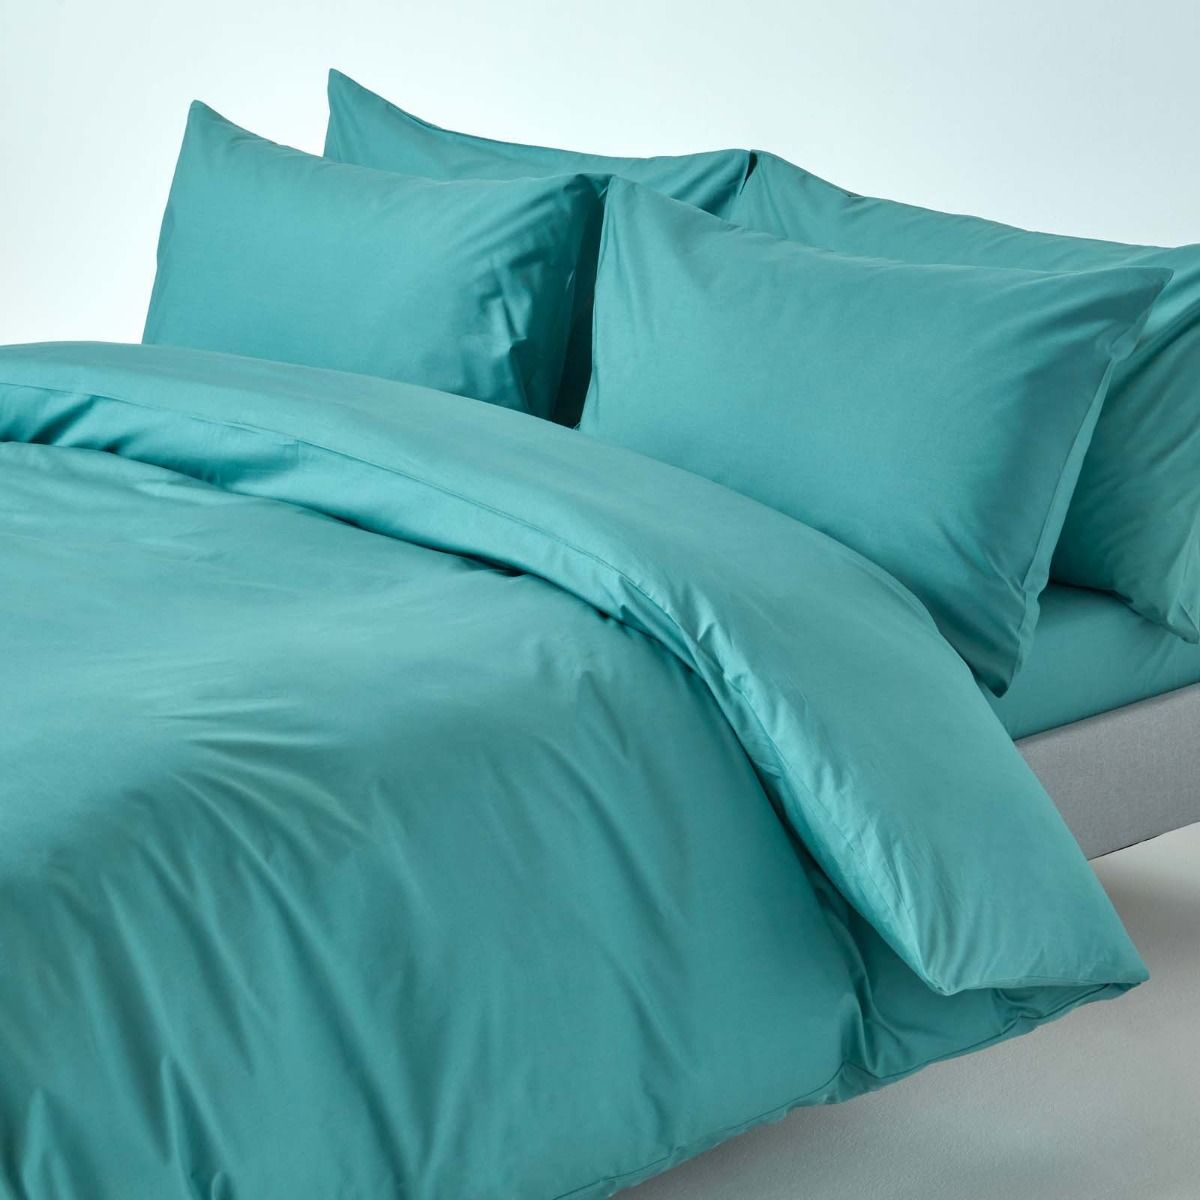 Teal Egyptian Cotton Duvet Cover With, Dark Teal Cotton Duvet Cover